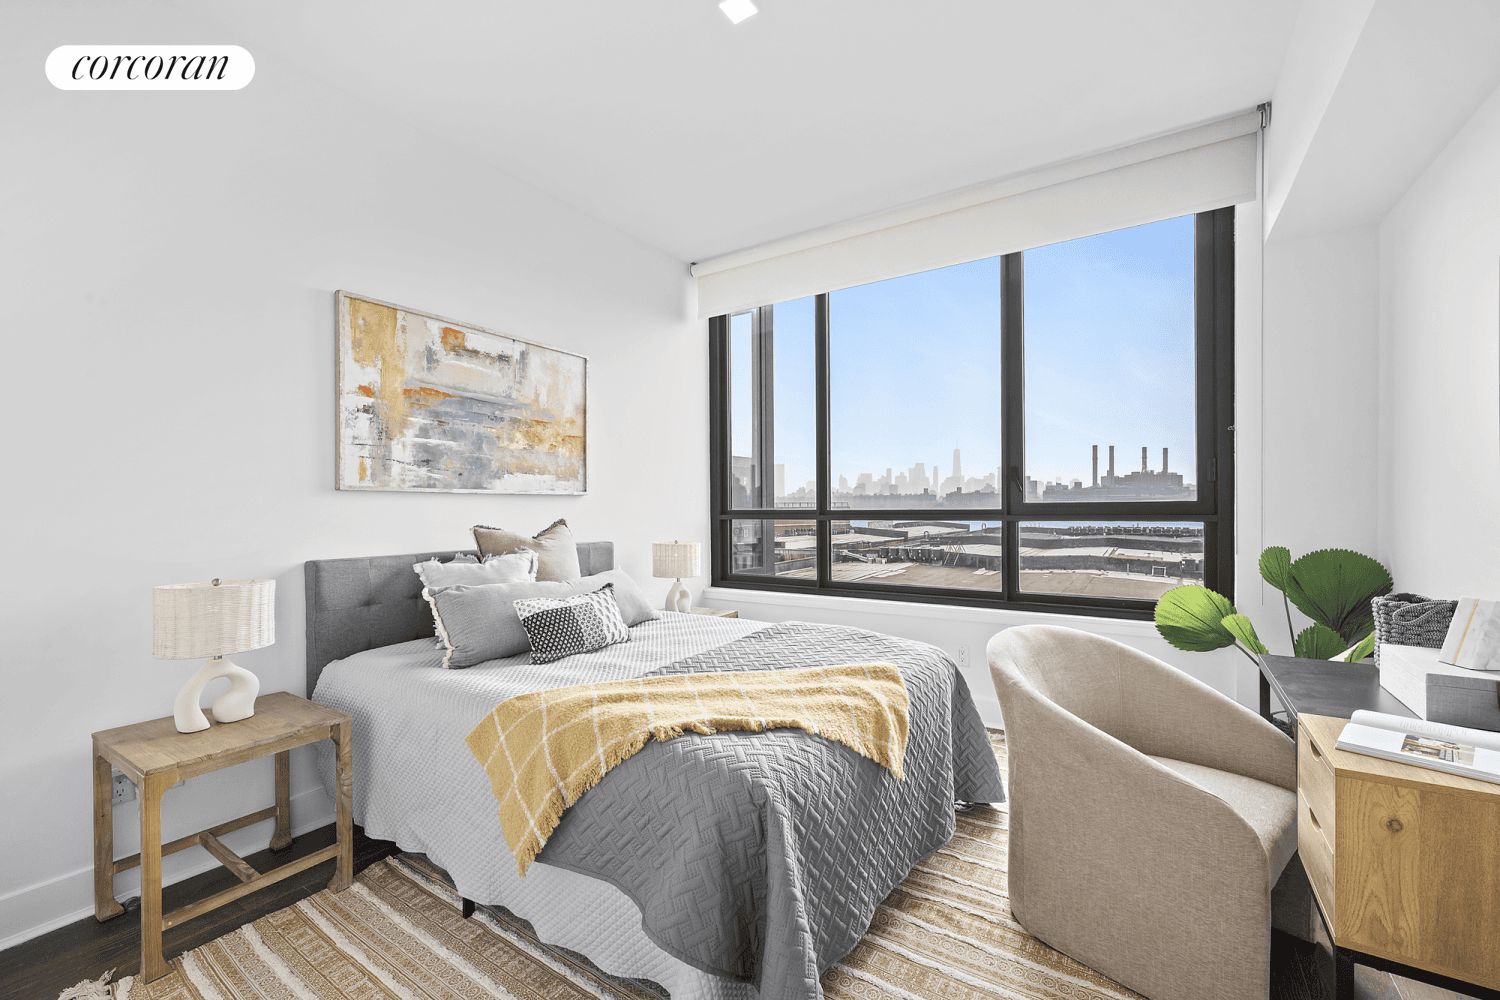 Unit 5D at 50 Greenpoint is a spacious duplex two bedroom home boasting double height ceilings and a wall of floor to ceiling windows, giving dramatic views of the East ...